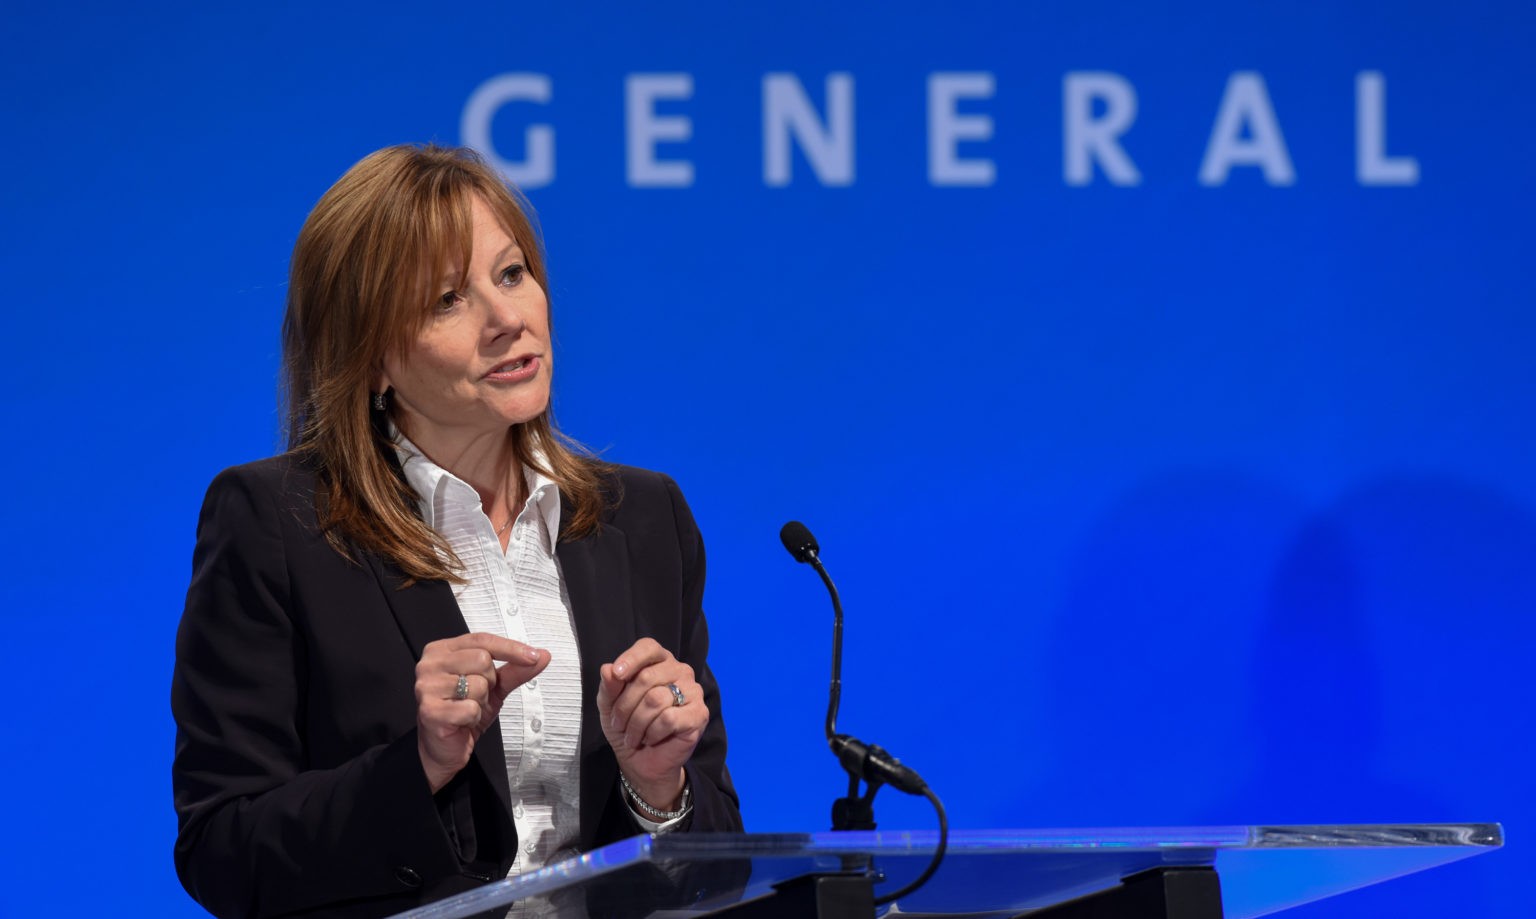 Mary Barra became the first female CEO of any automaker in the world